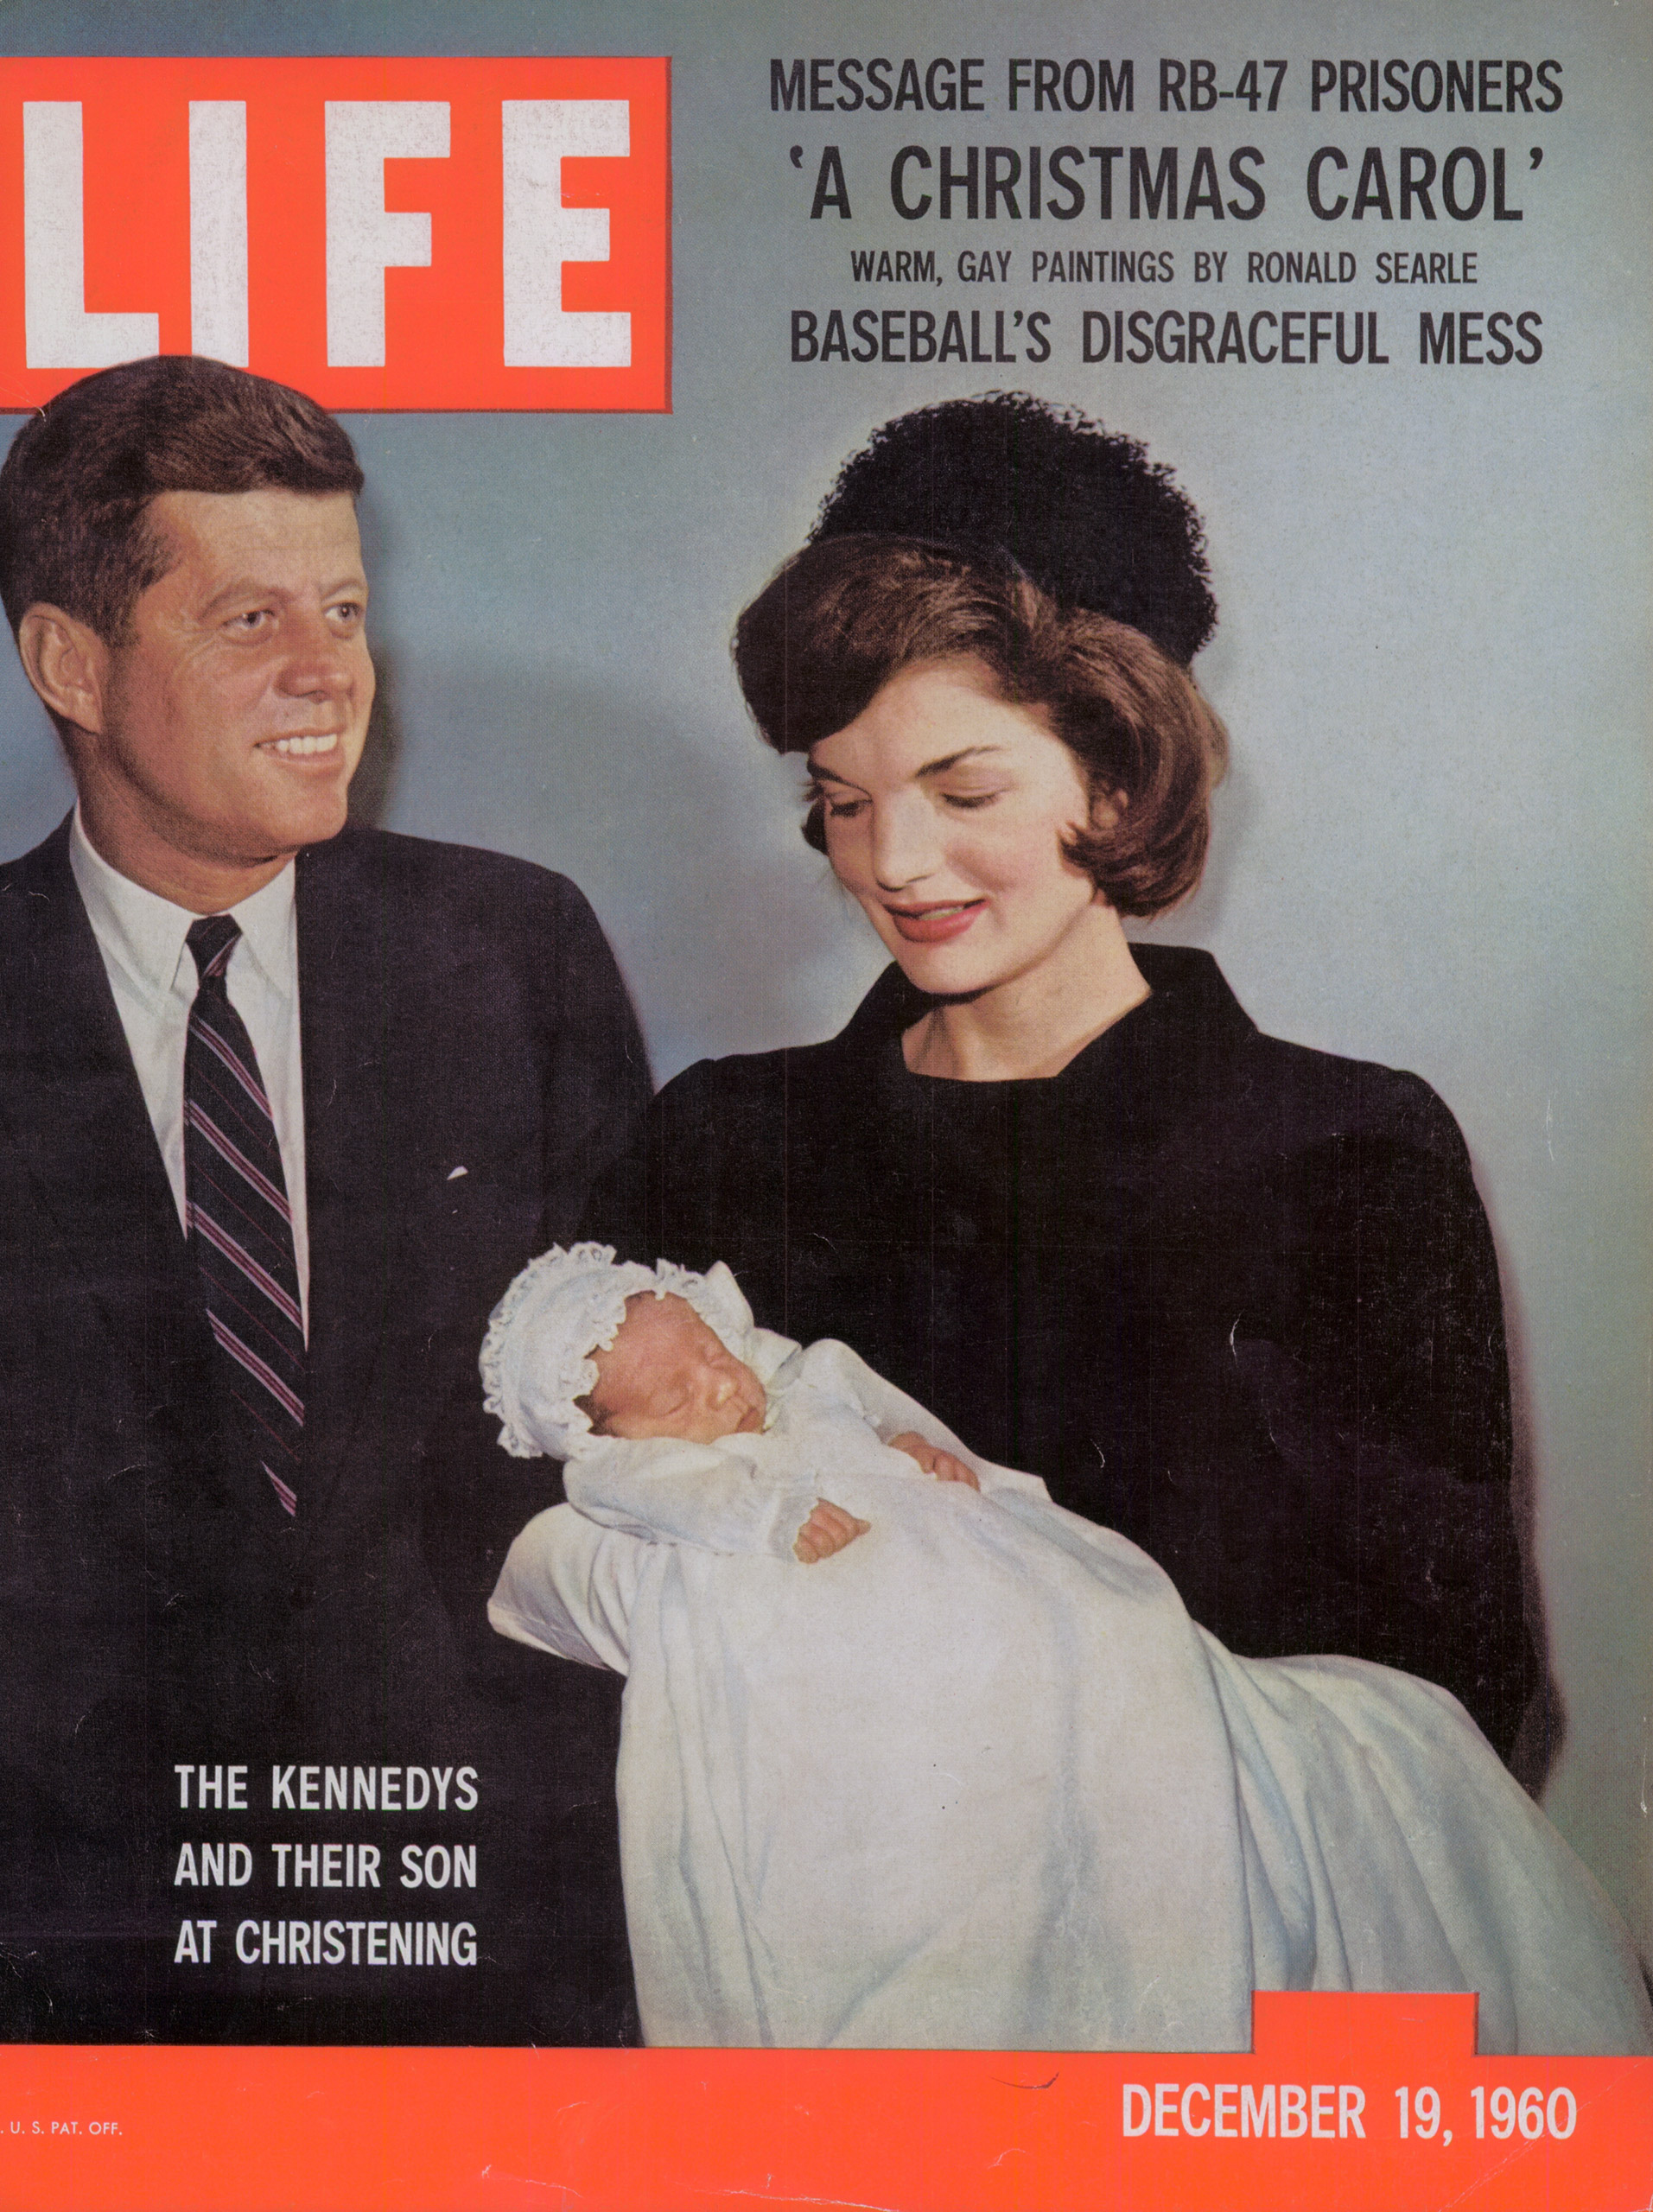 Dec. 19, 1960 cover of LIFE magazine. Cover photo by Stanley Tretick.